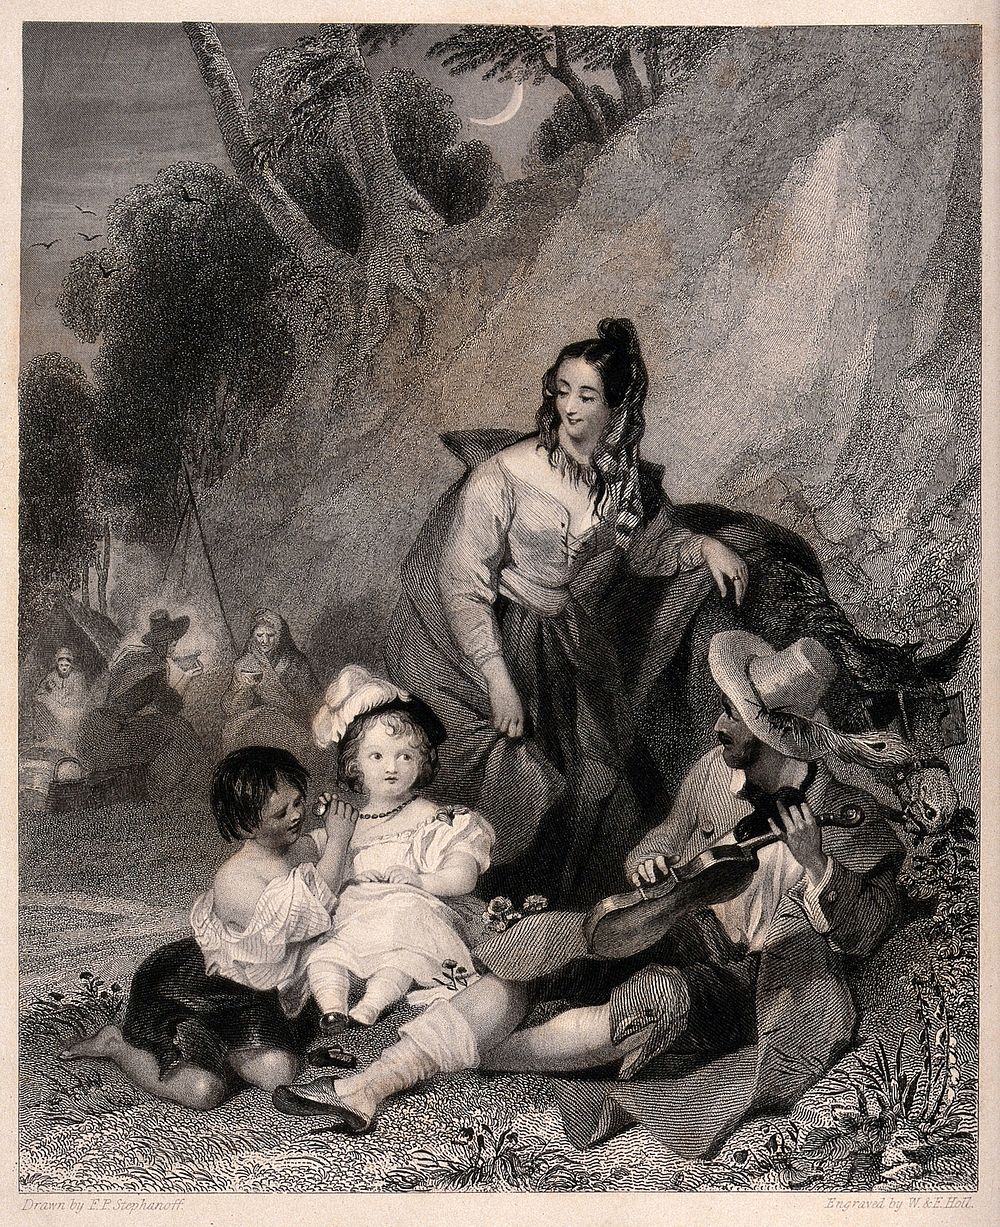 A family of gypsies sit in their camp with a child they have stolen. Engraving by W. & F. Holl, 1840, after F.P. Stephanoff.